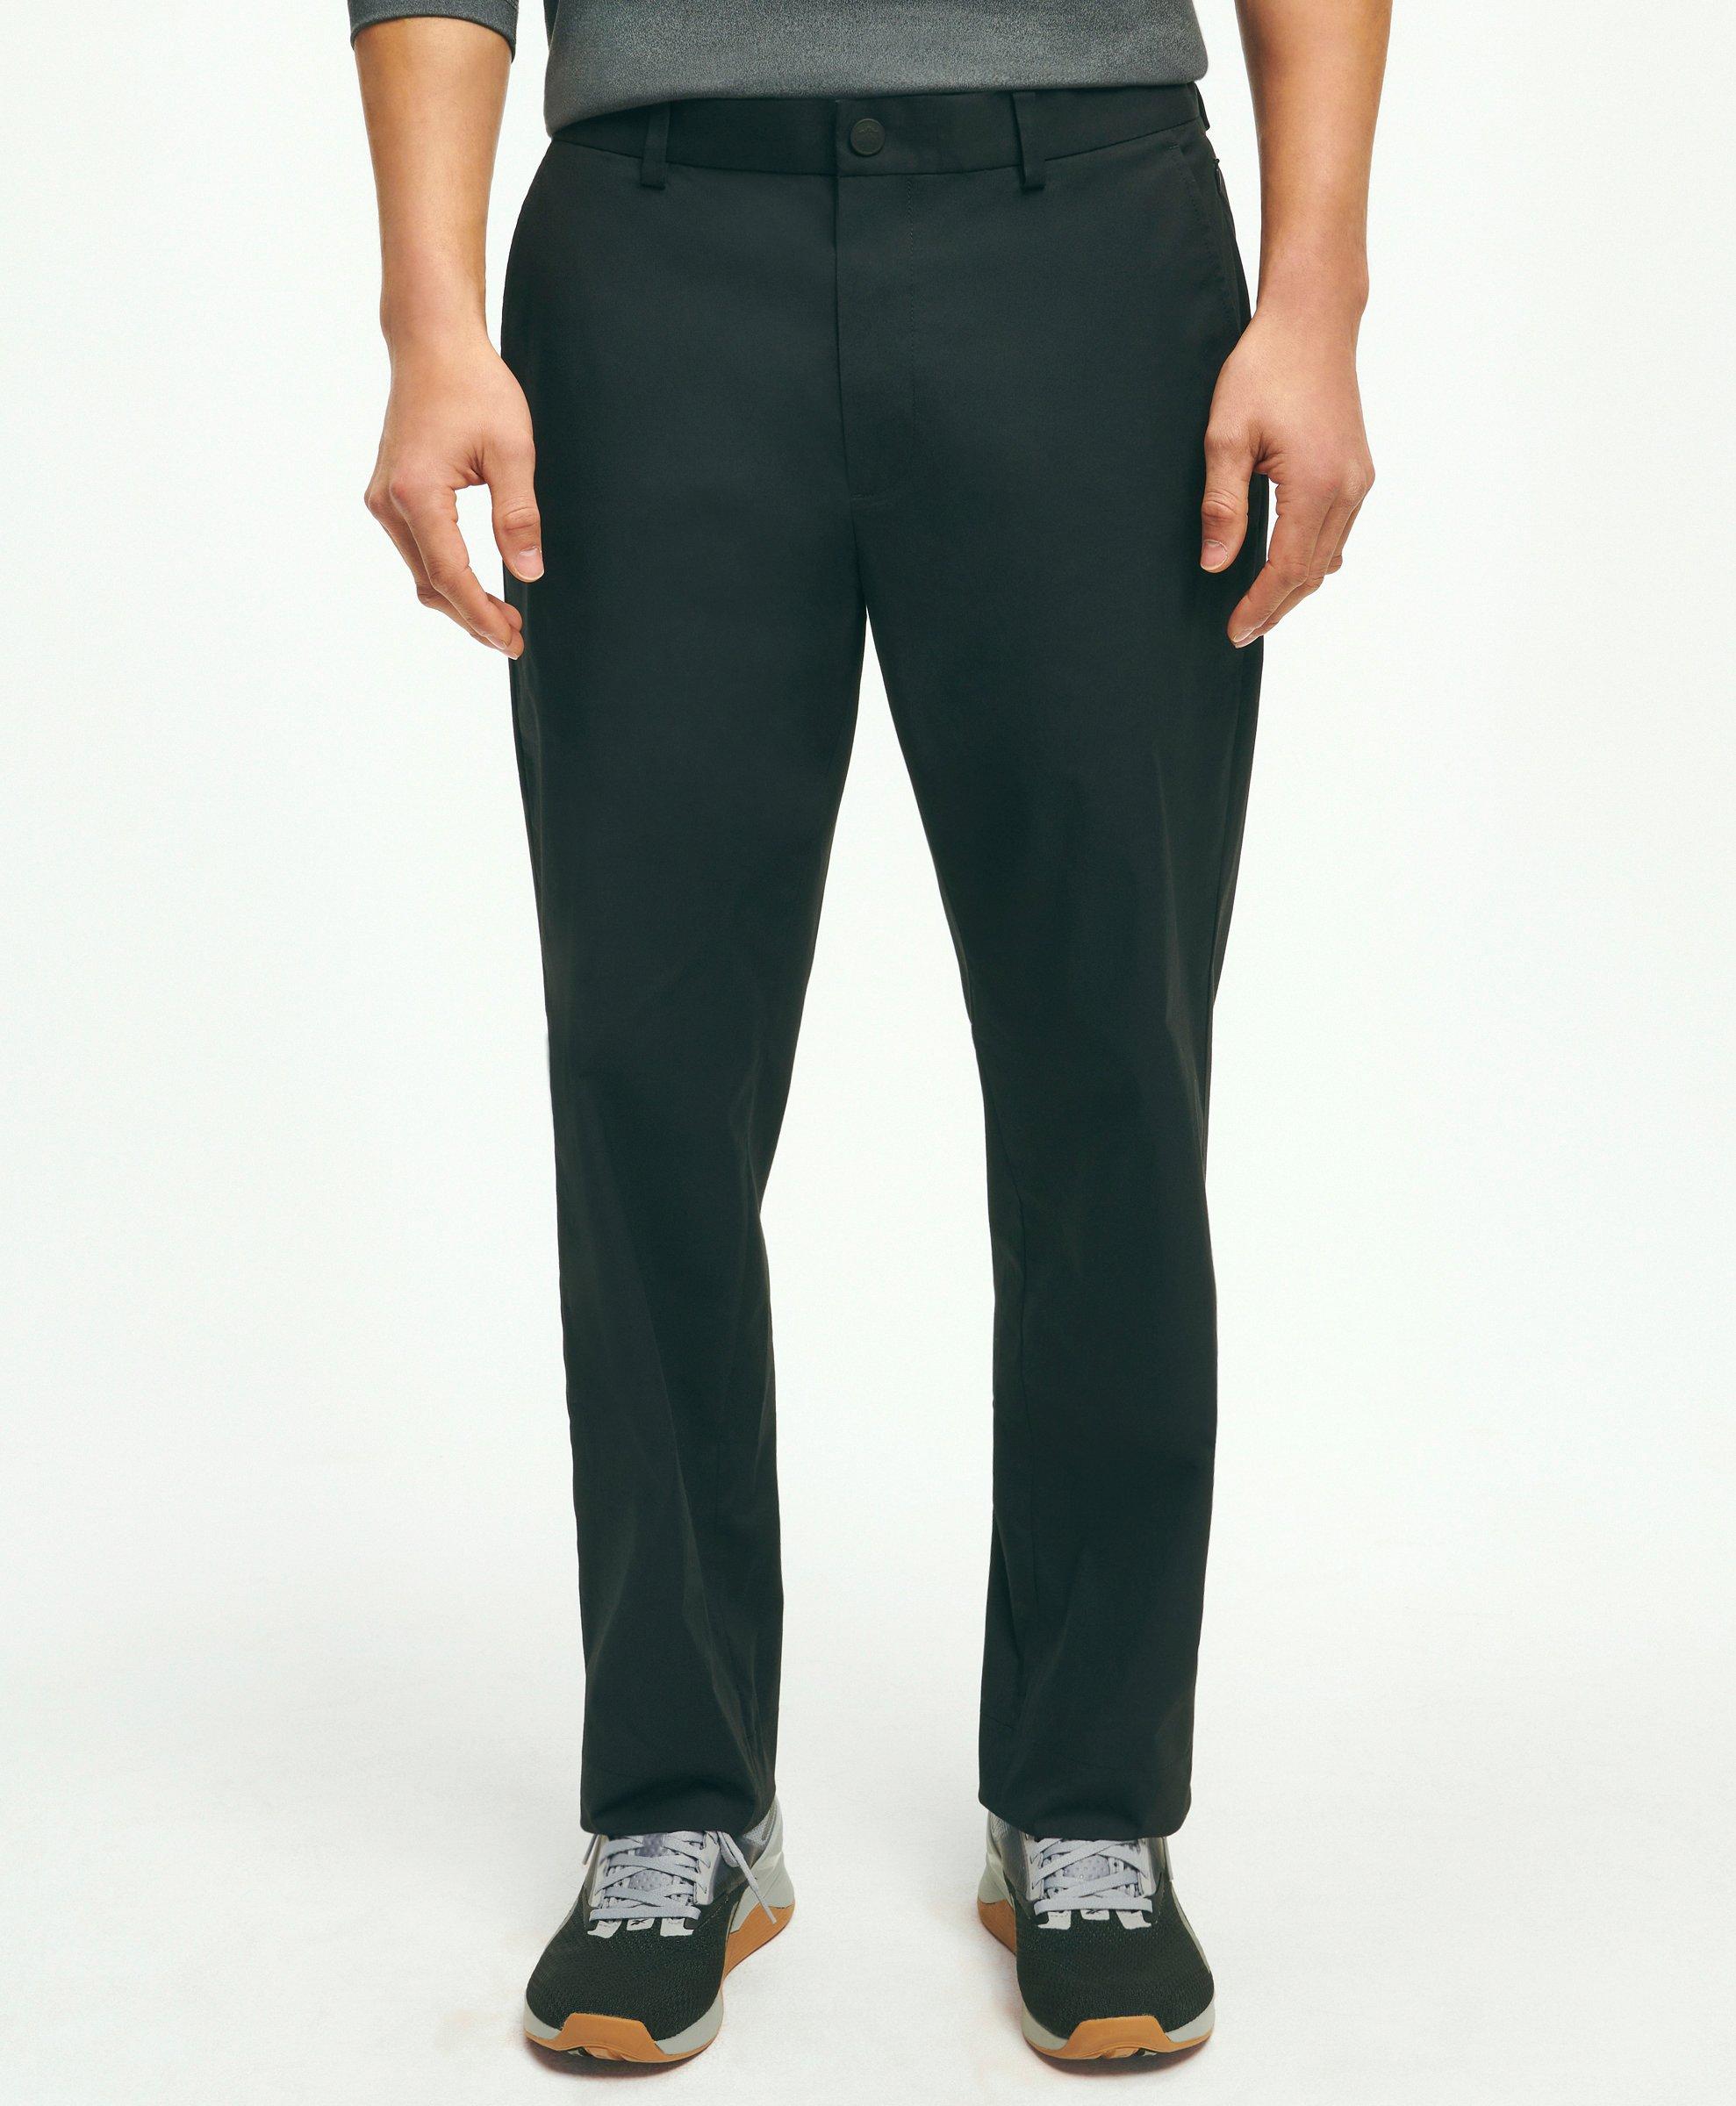 Shop Brooks Brothers Performance Series Stretch Chino Pants | Black | Size 31 32